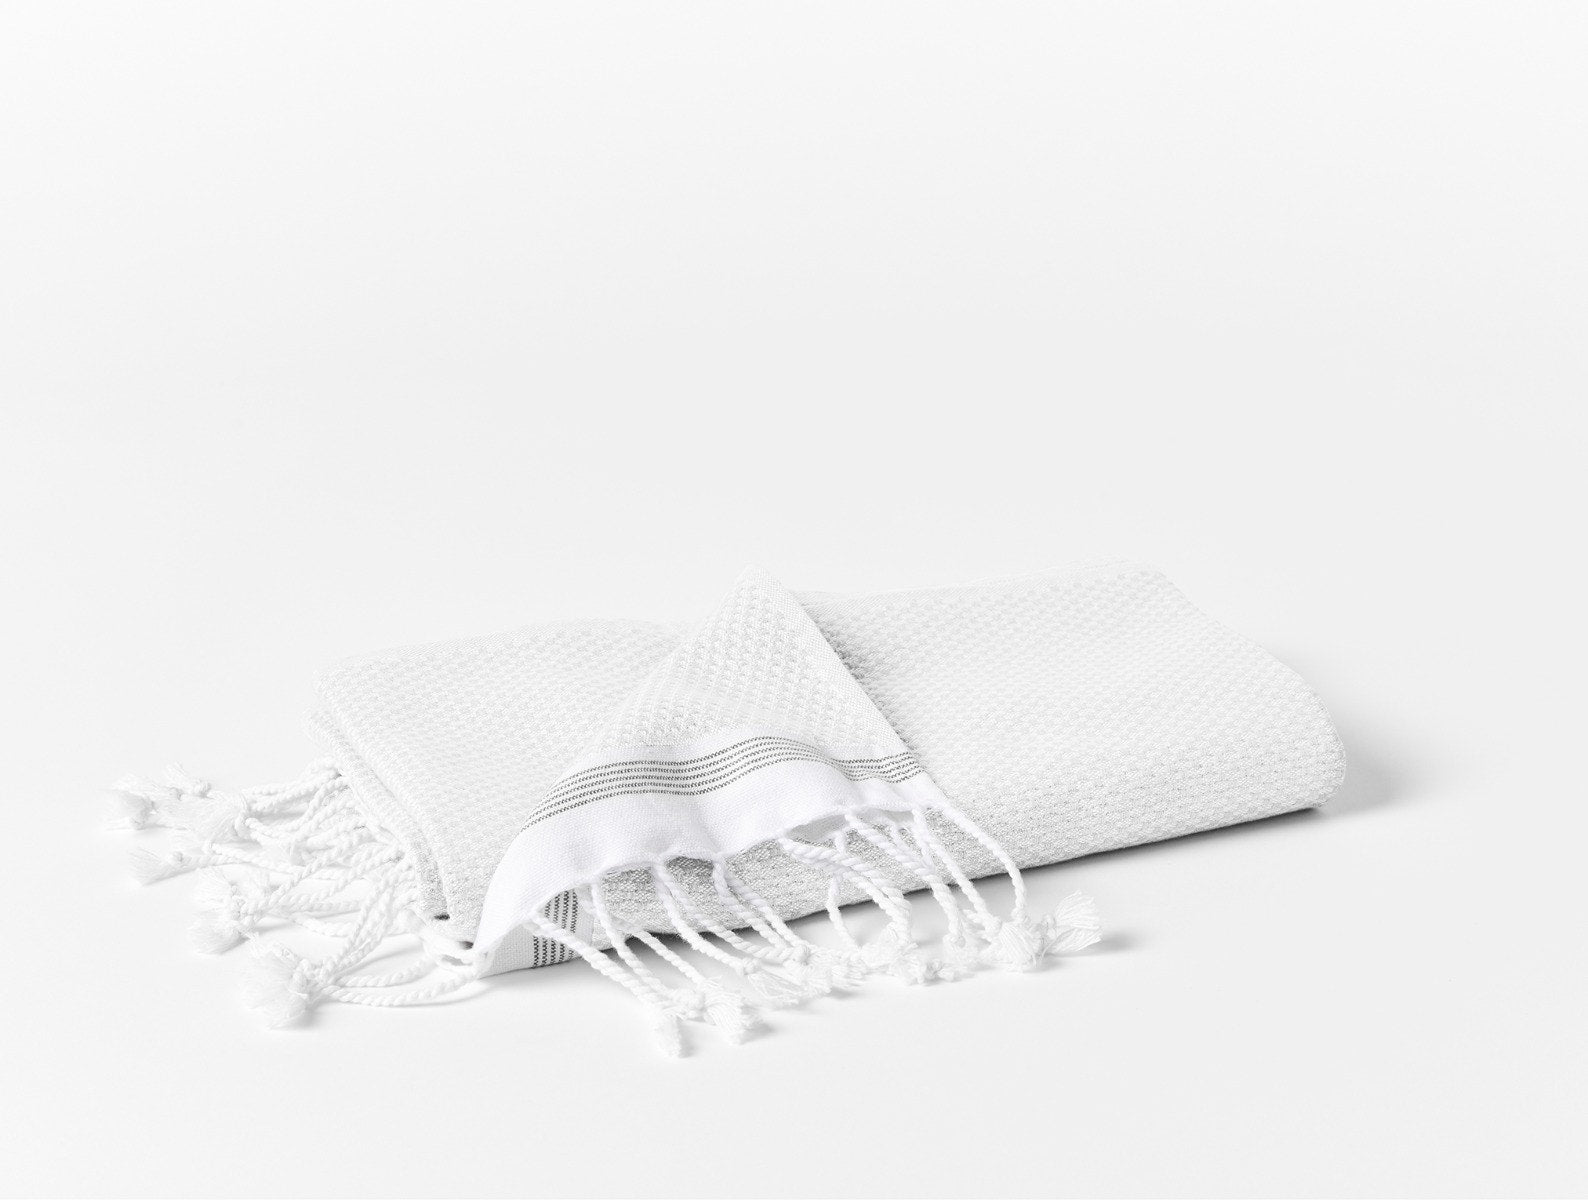 Turkish Hand Towels | Antiochia Home Linens White/Baby Blue